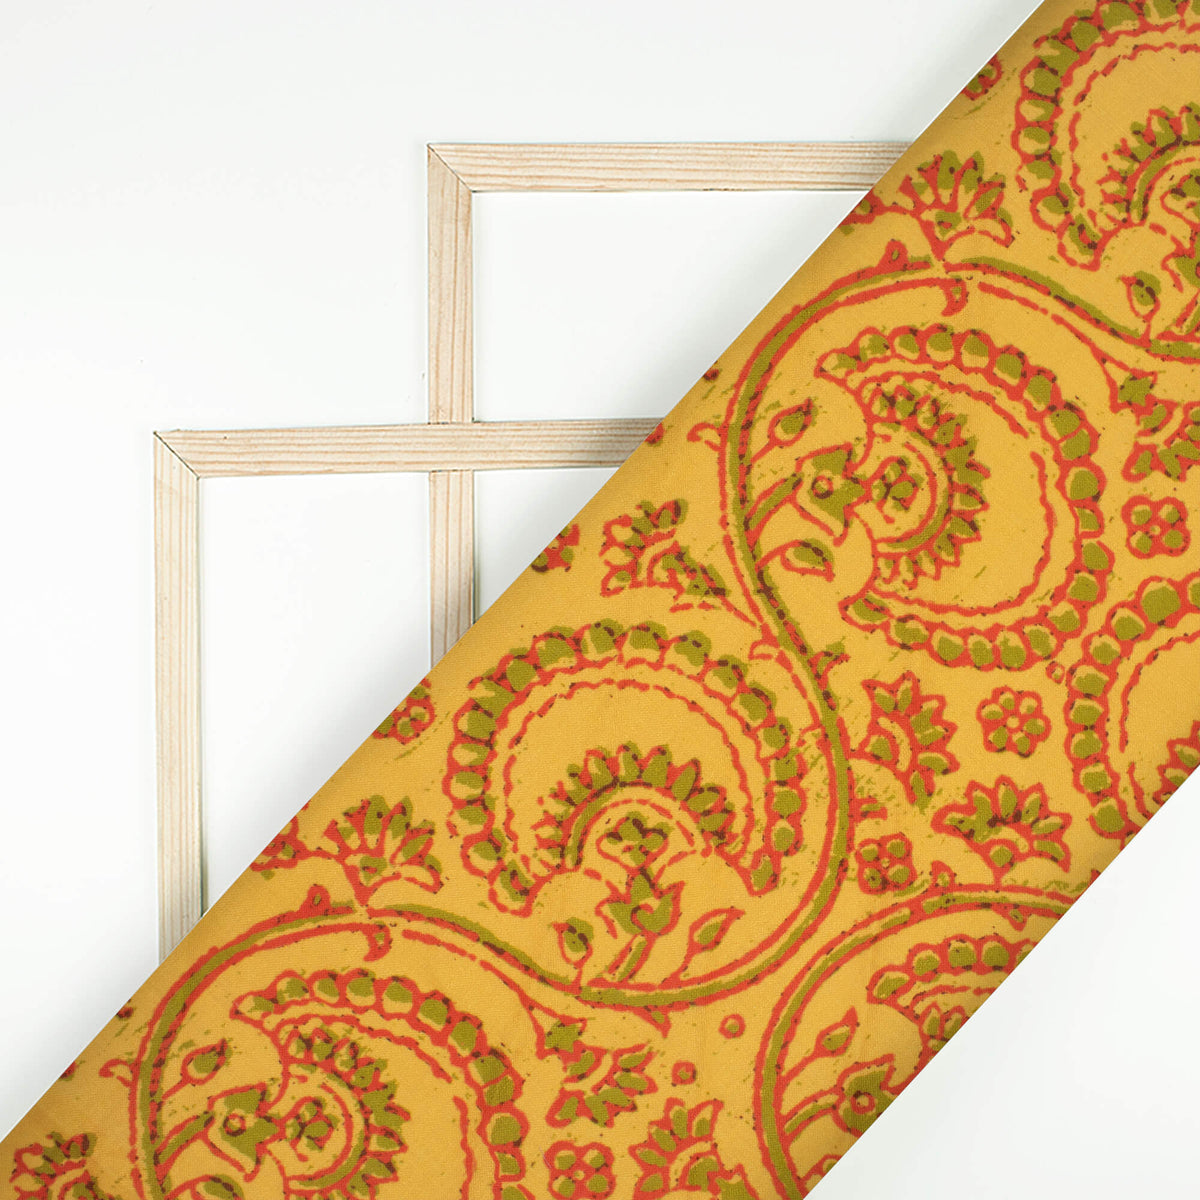 Goldenrod Yellow And Red Floral Pattern Digital Print Linen Textured Fabric (Width 56 Inches)